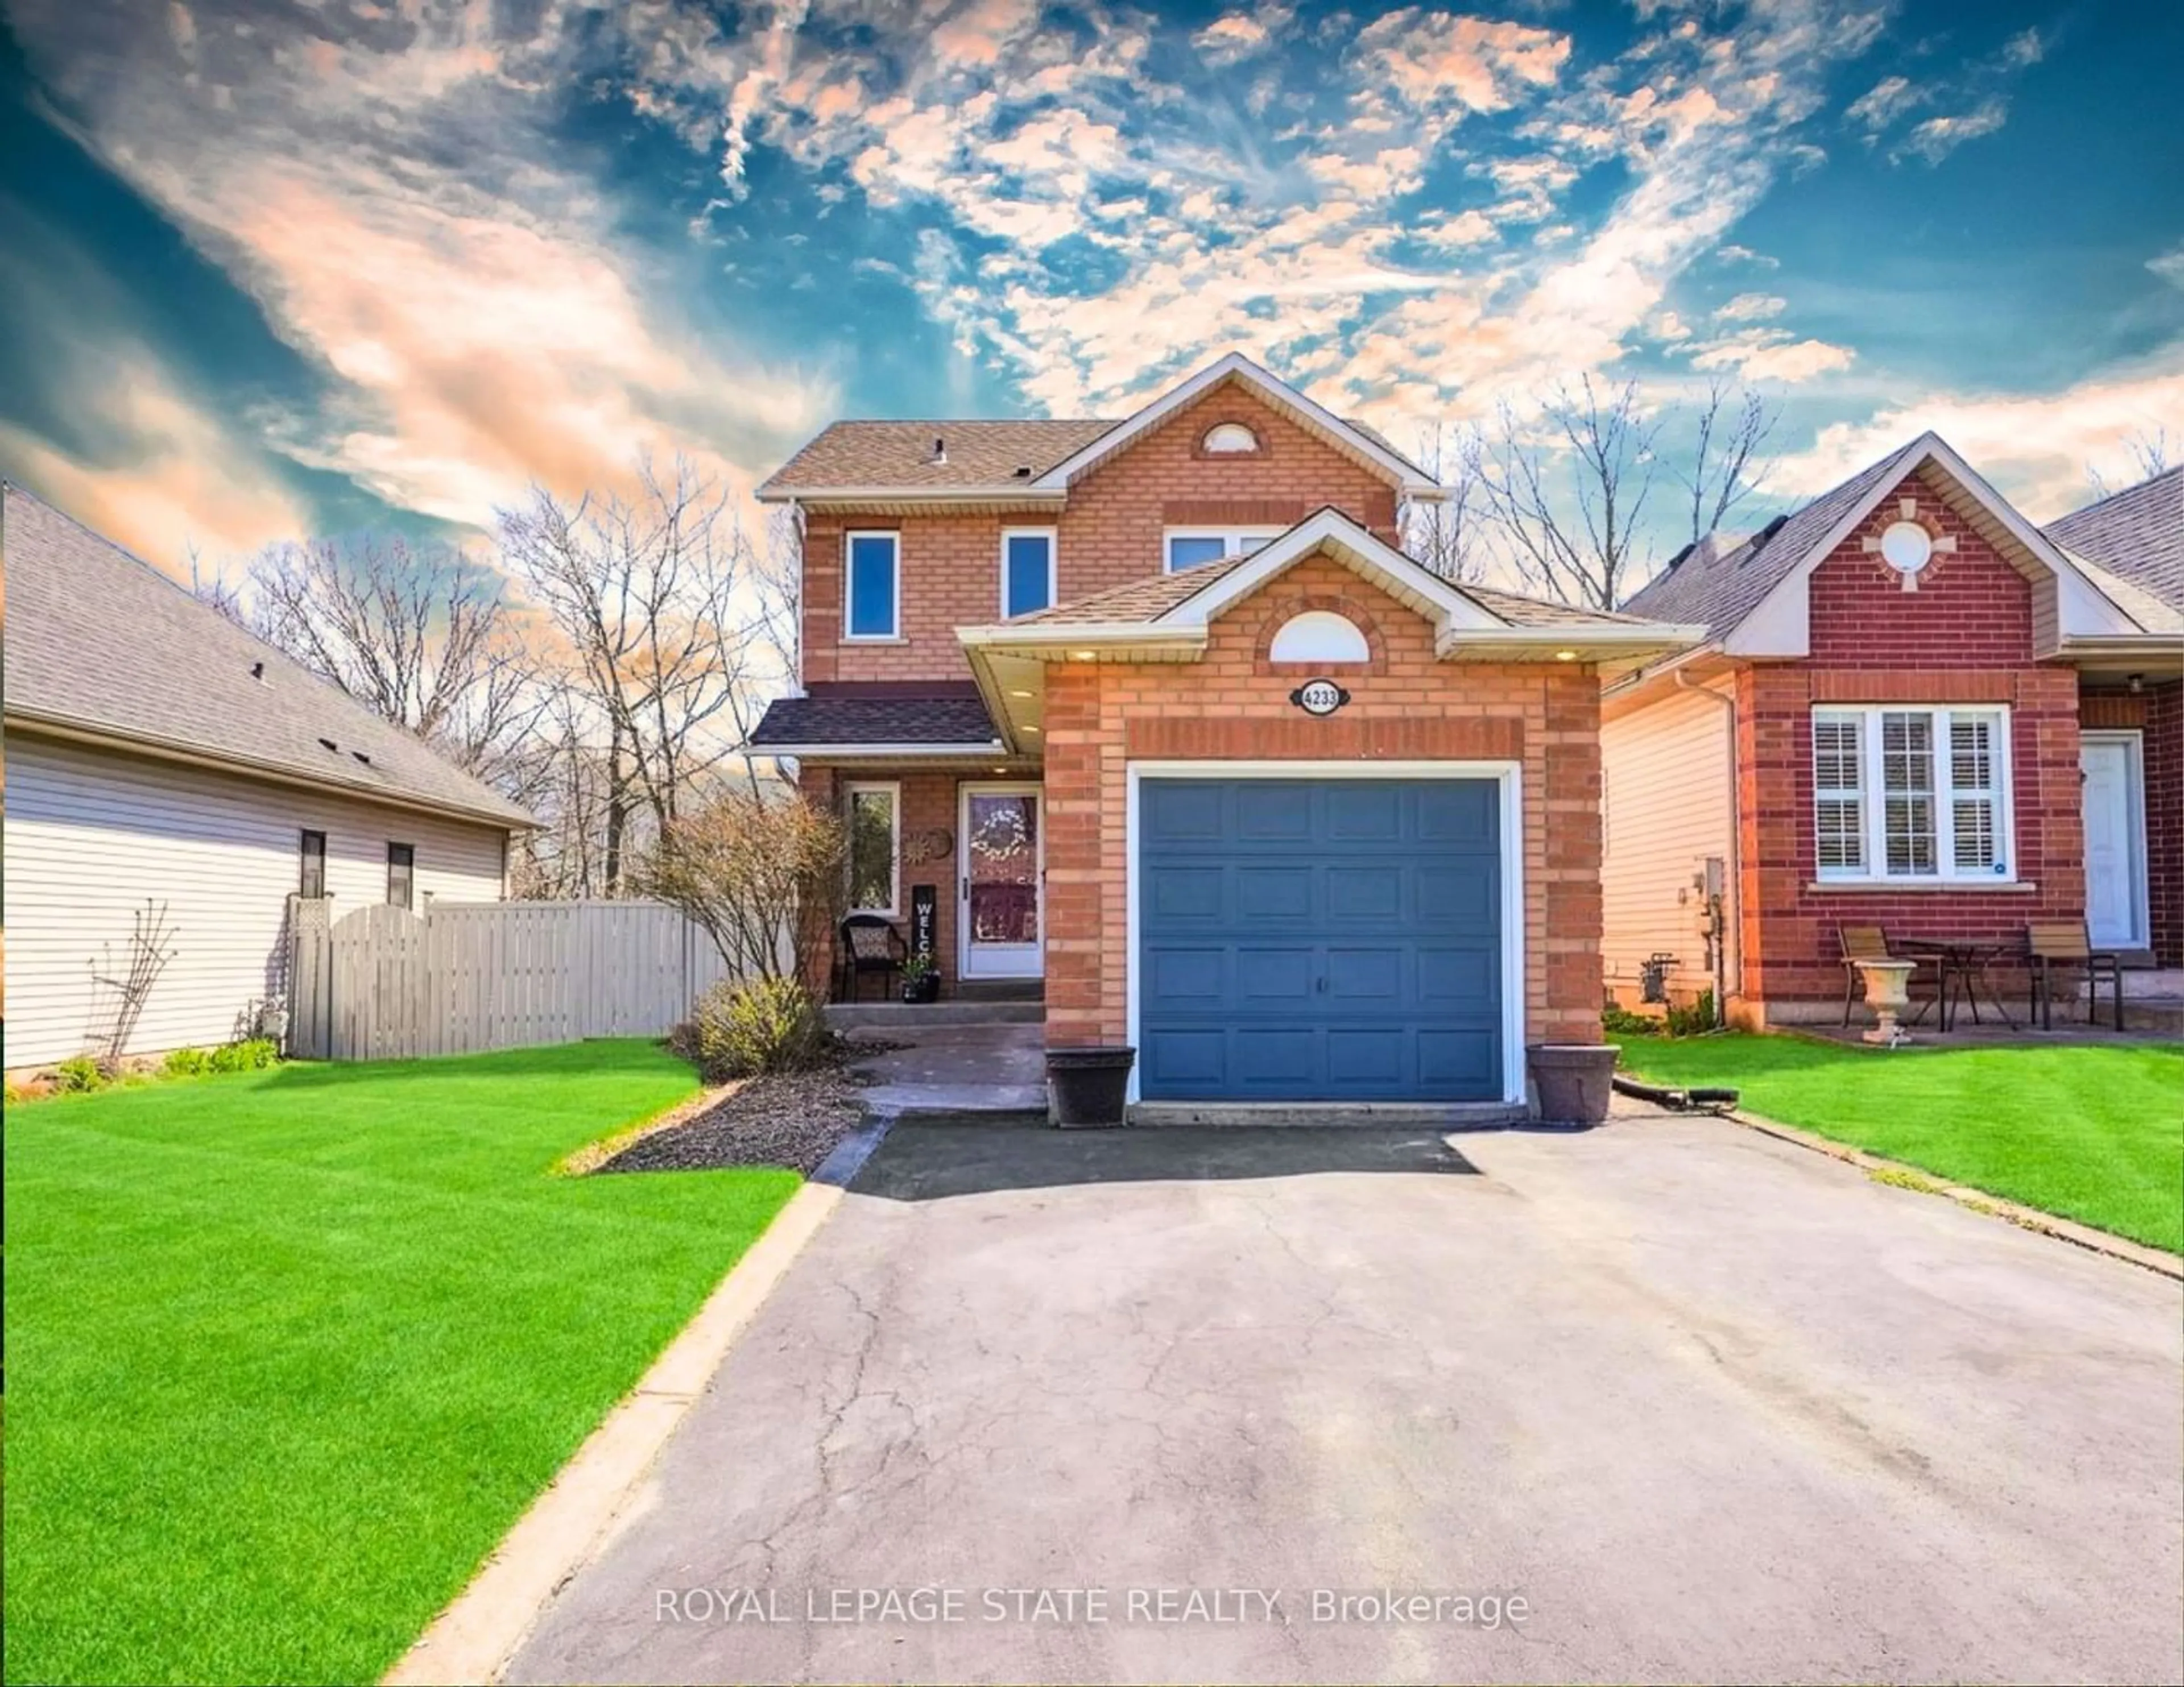 Home with brick exterior material for 4233 Stadelbauer Dr, Lincoln Ontario L3J 0J9